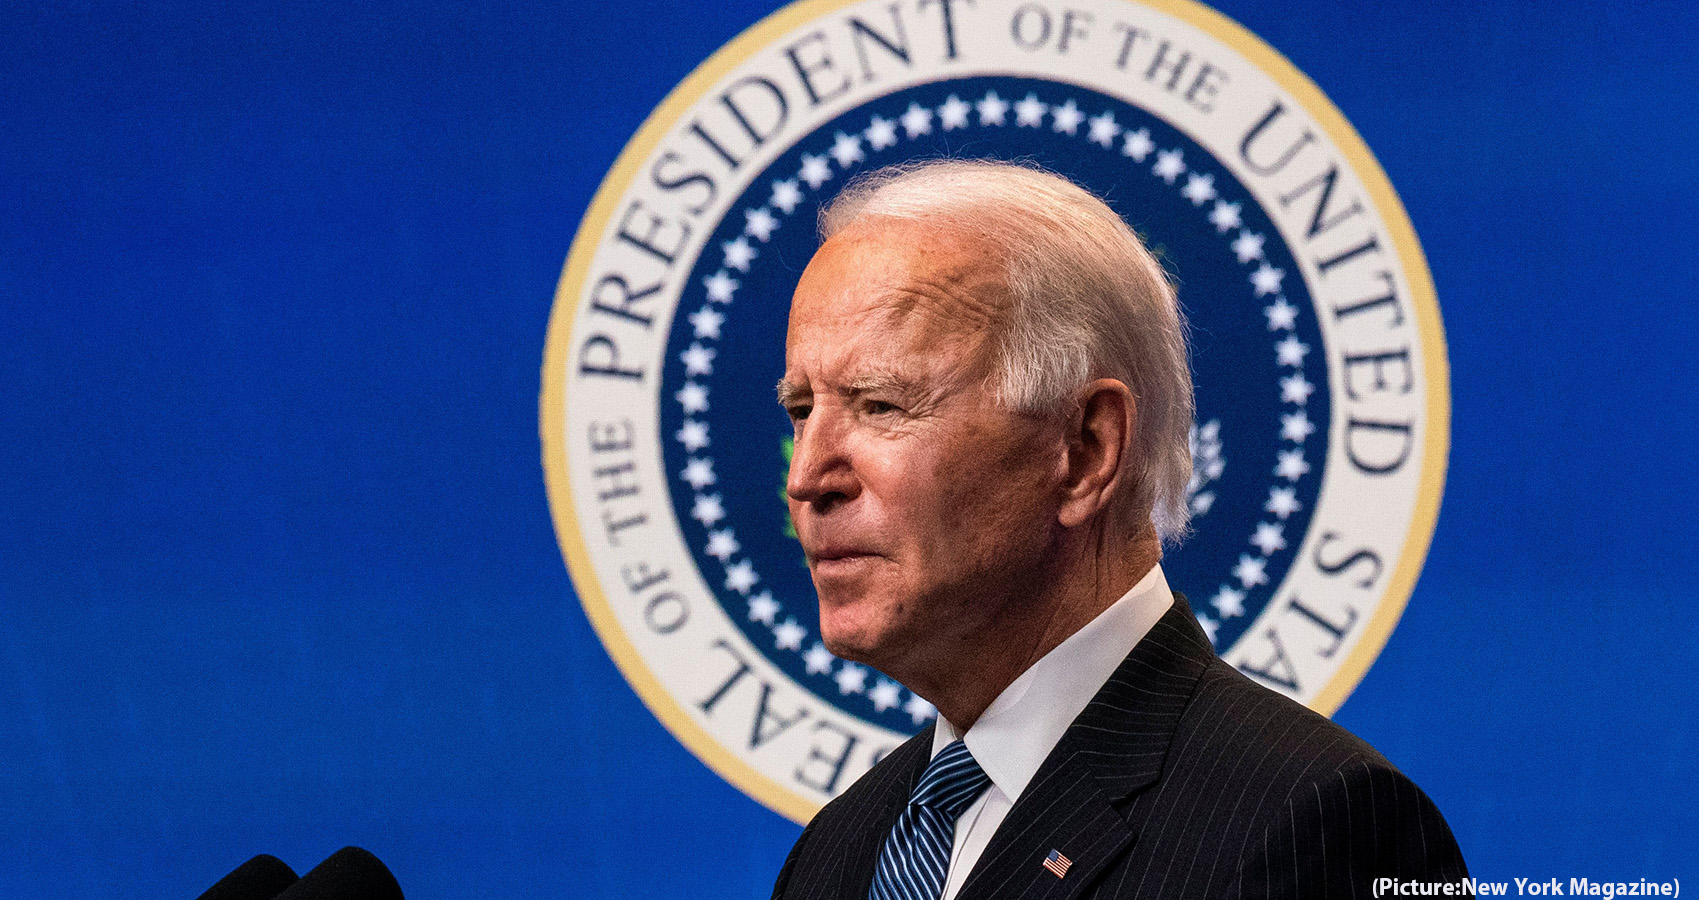 Independents’ Views On The Economy Pose A Political Risk To Joe Biden